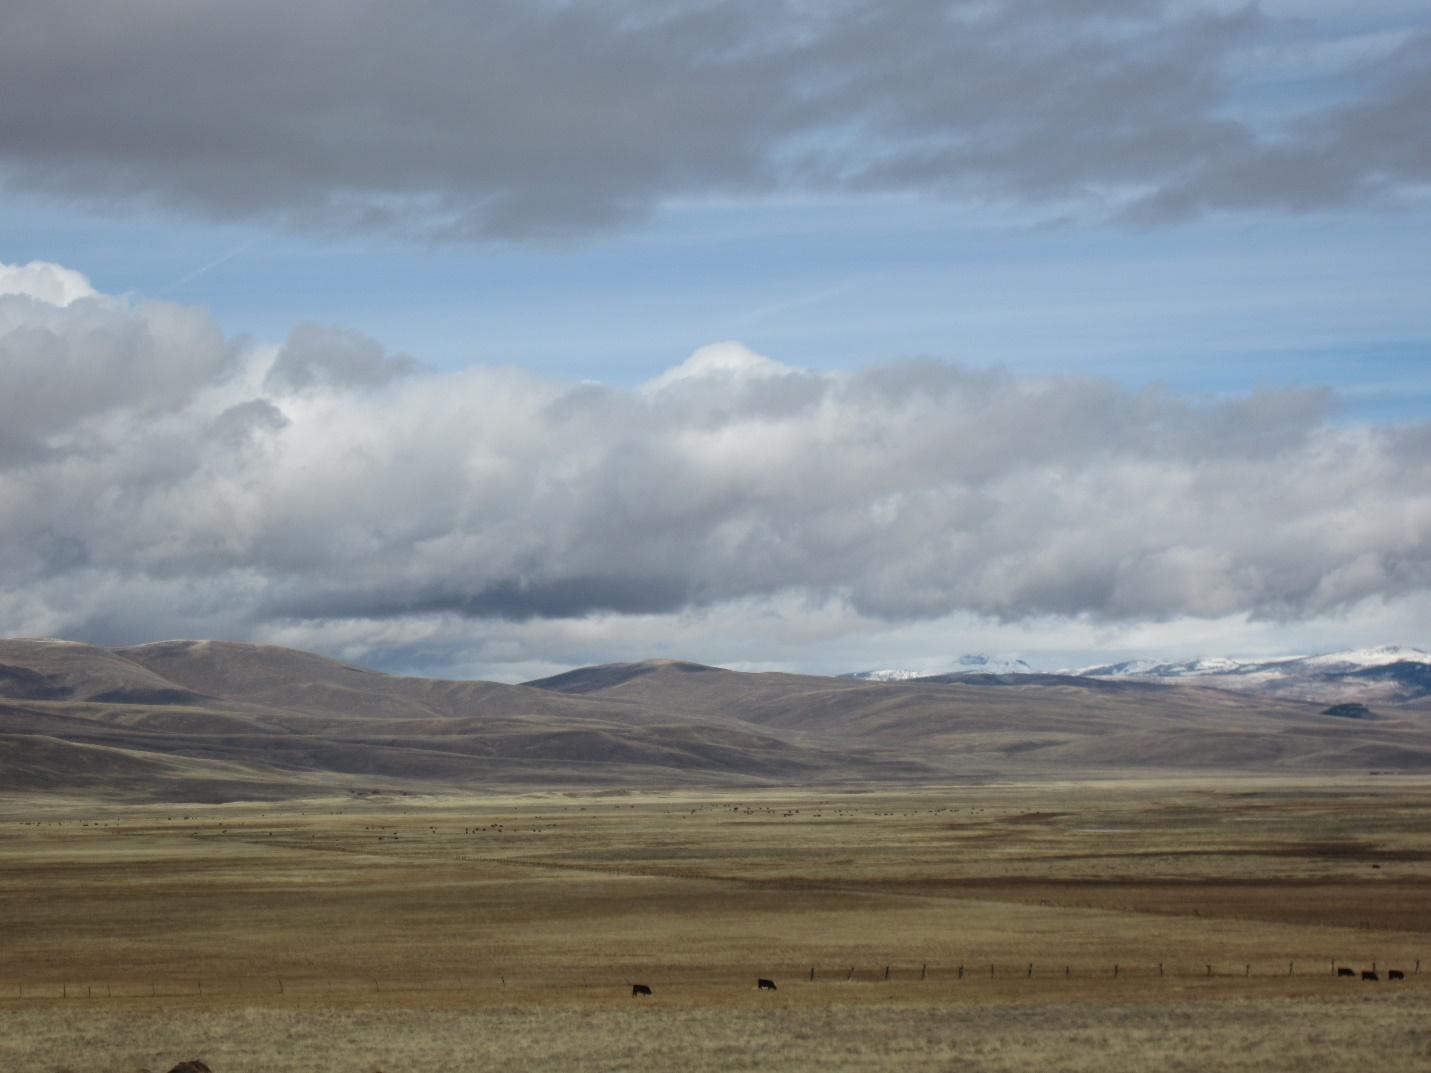 Cows grazing on rangeland near foothills and snow-capped mountains on a cloudy day. 